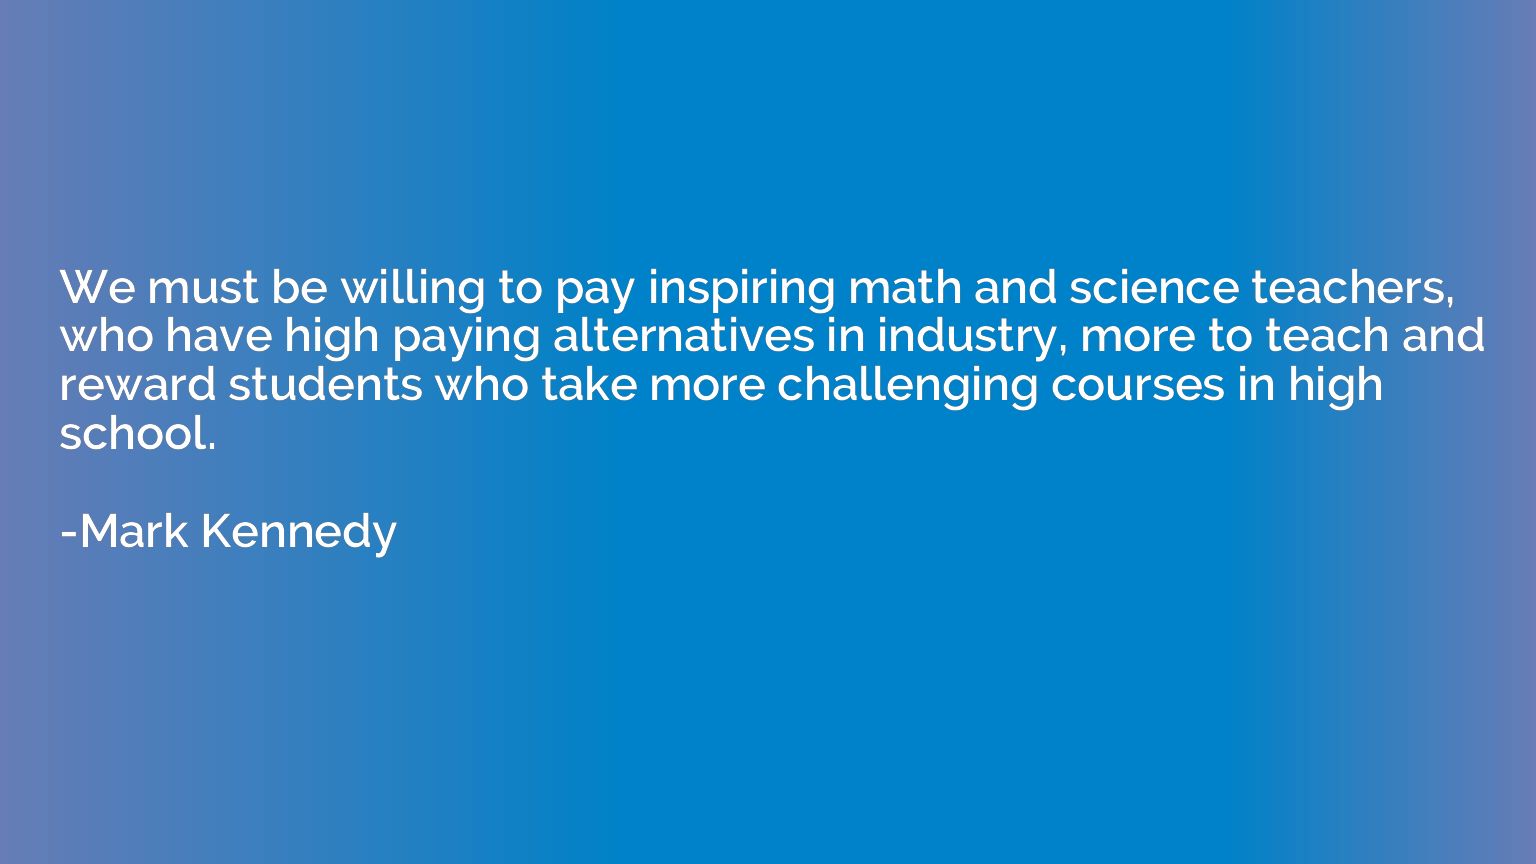 We must be willing to pay inspiring math and science teacher